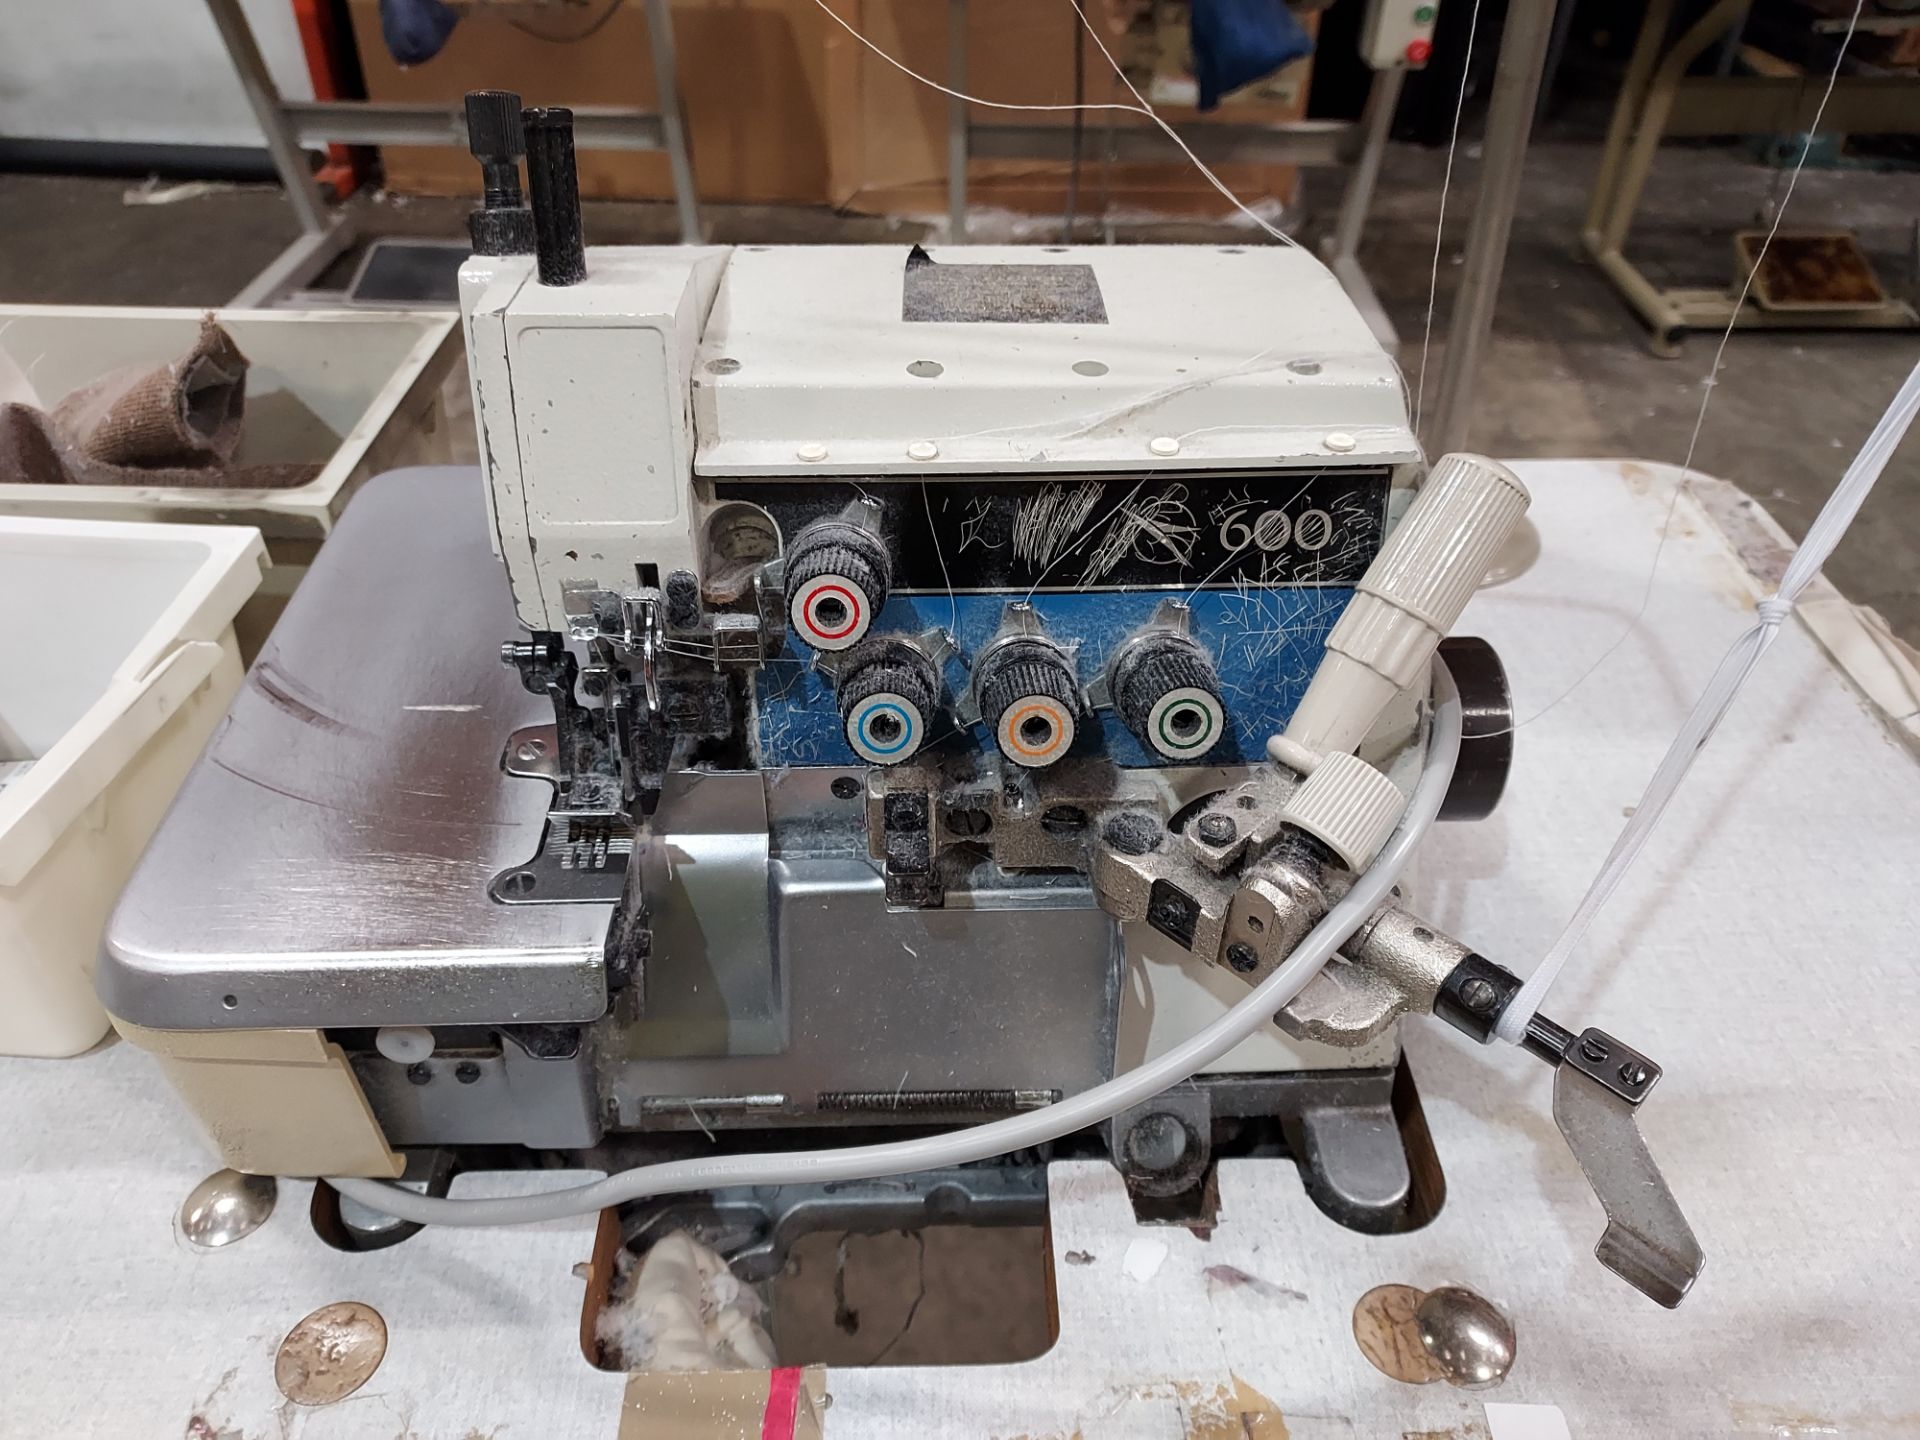 1 X BROTHER ( 600) INDUSTRIAL 4 THREAD OVERLOCKER SEWING MACHINE - WITH FOOT PEDAL AND TABLE - Image 2 of 2